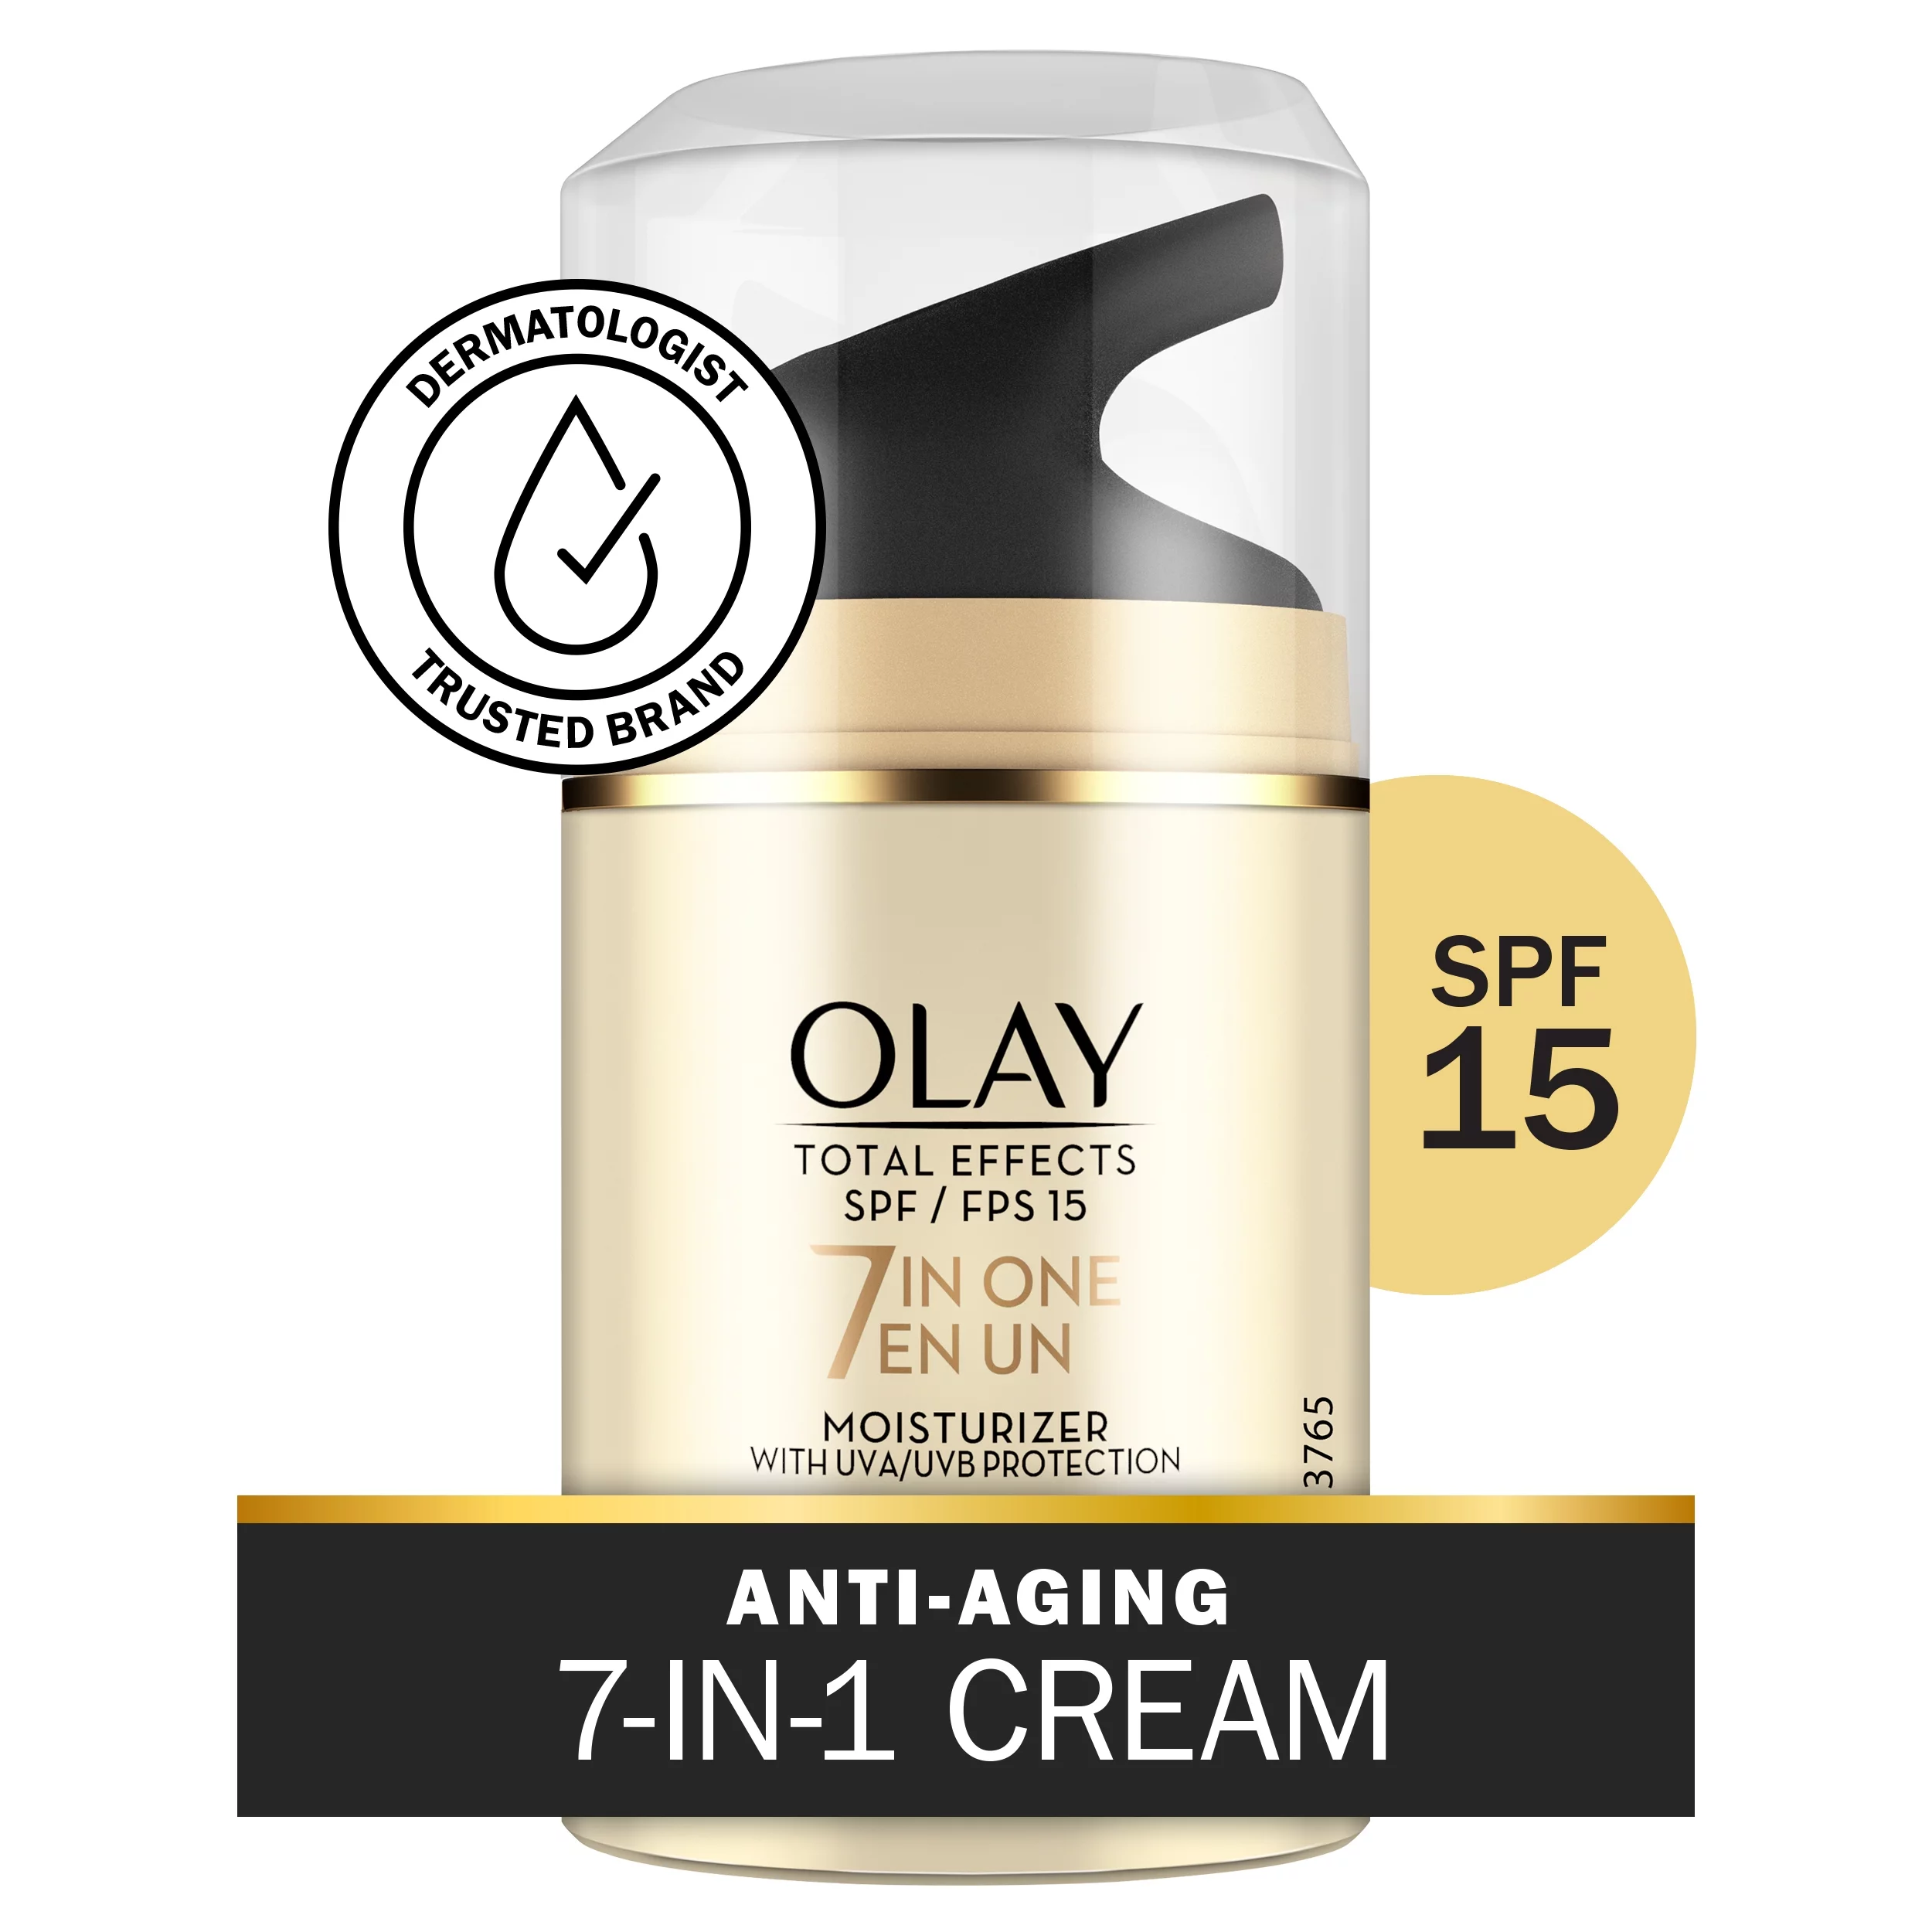 Olay Total Effects Face Moisturizer SPF 15, Combination Skin, Fragrance-Free, 1.7 fl oz